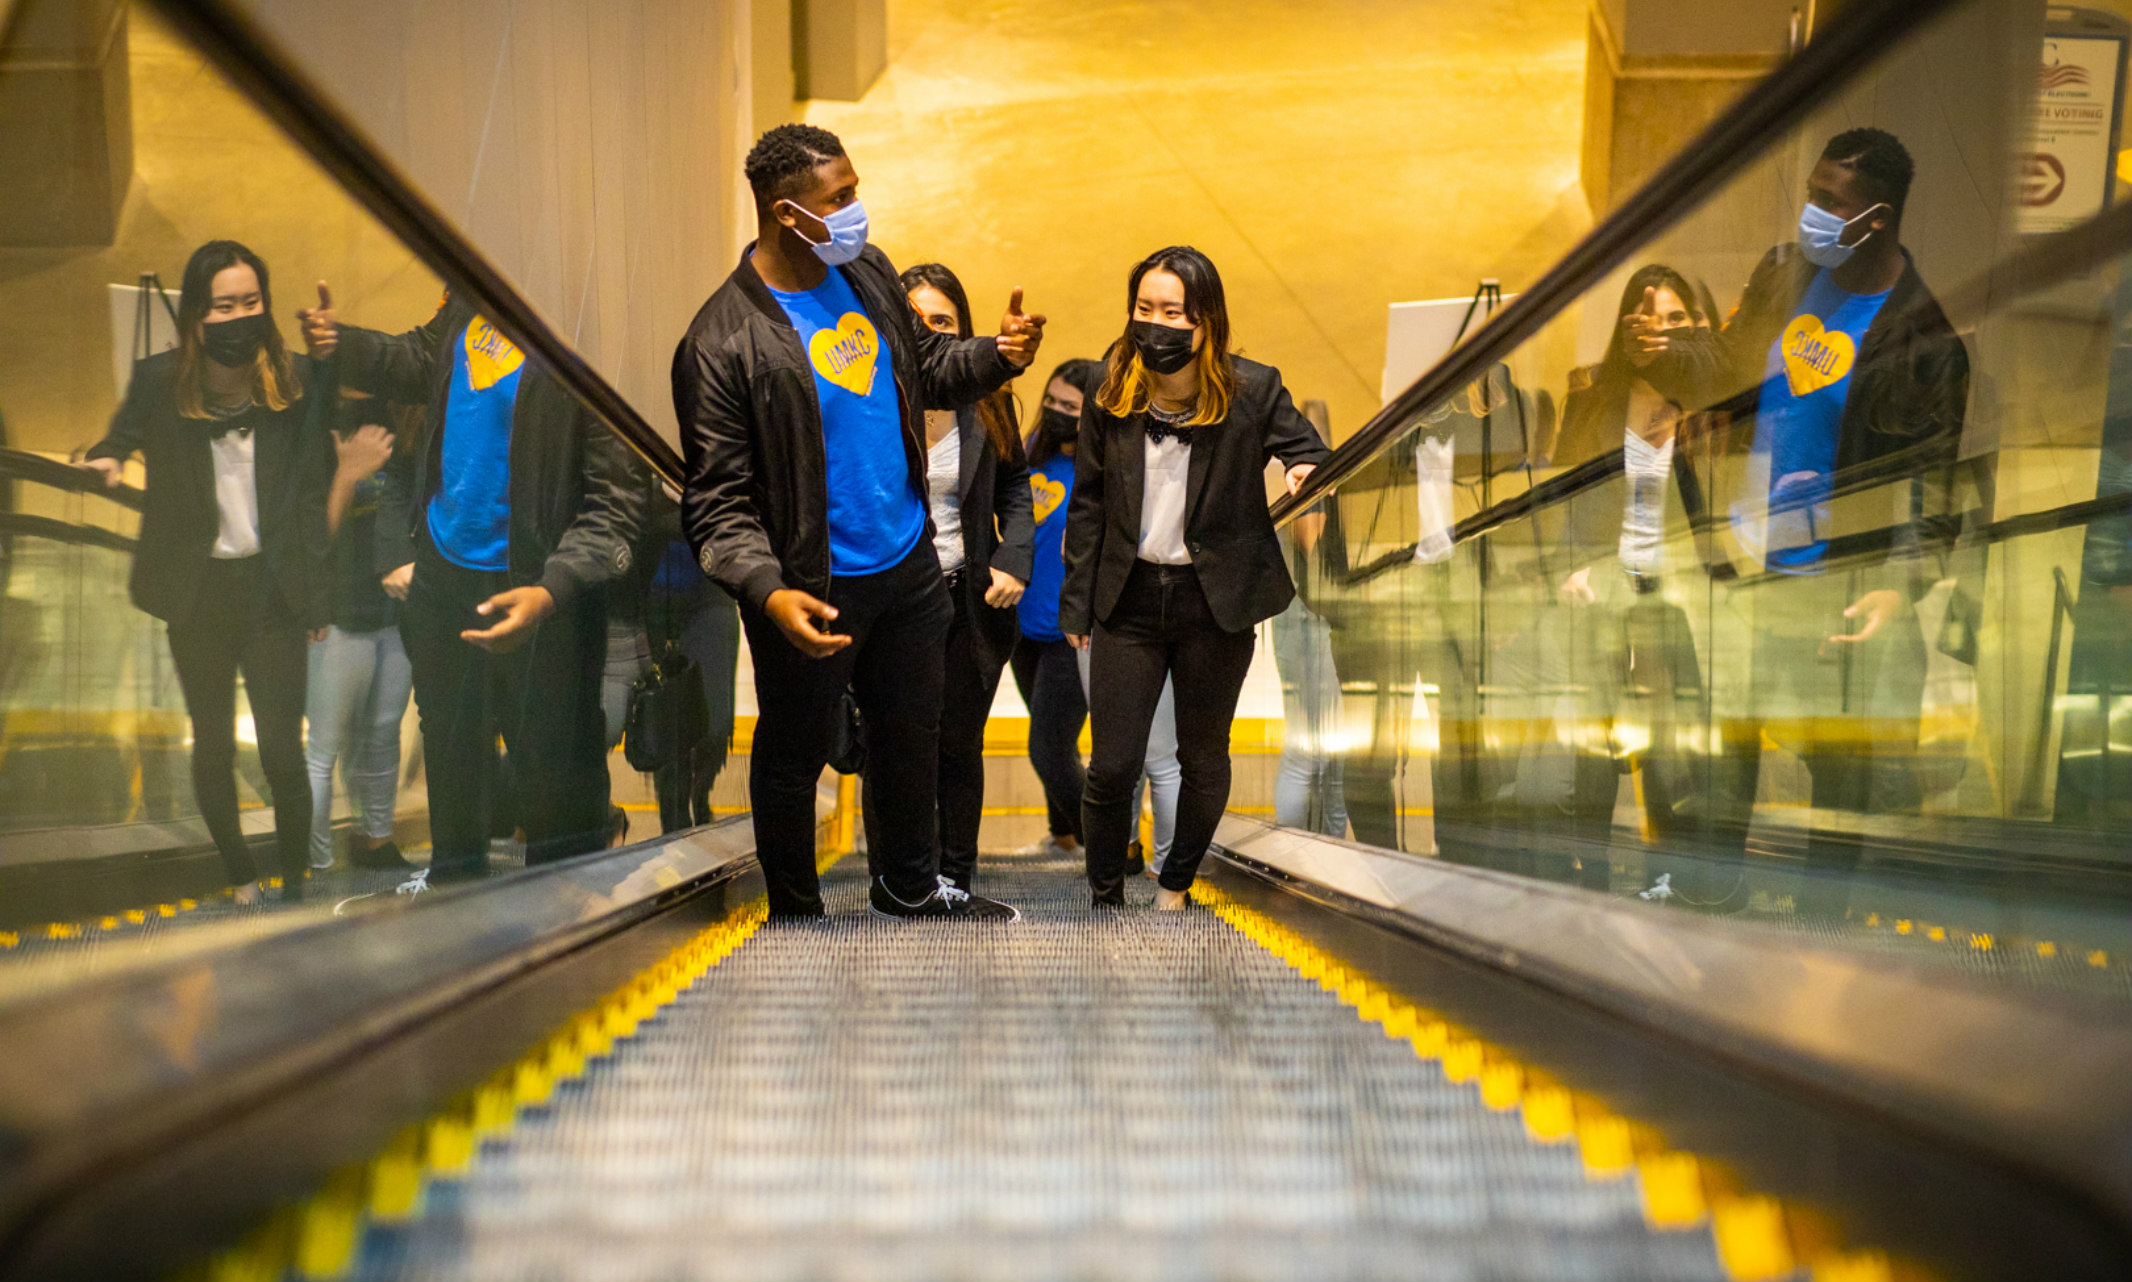 Students ascending on an escalator